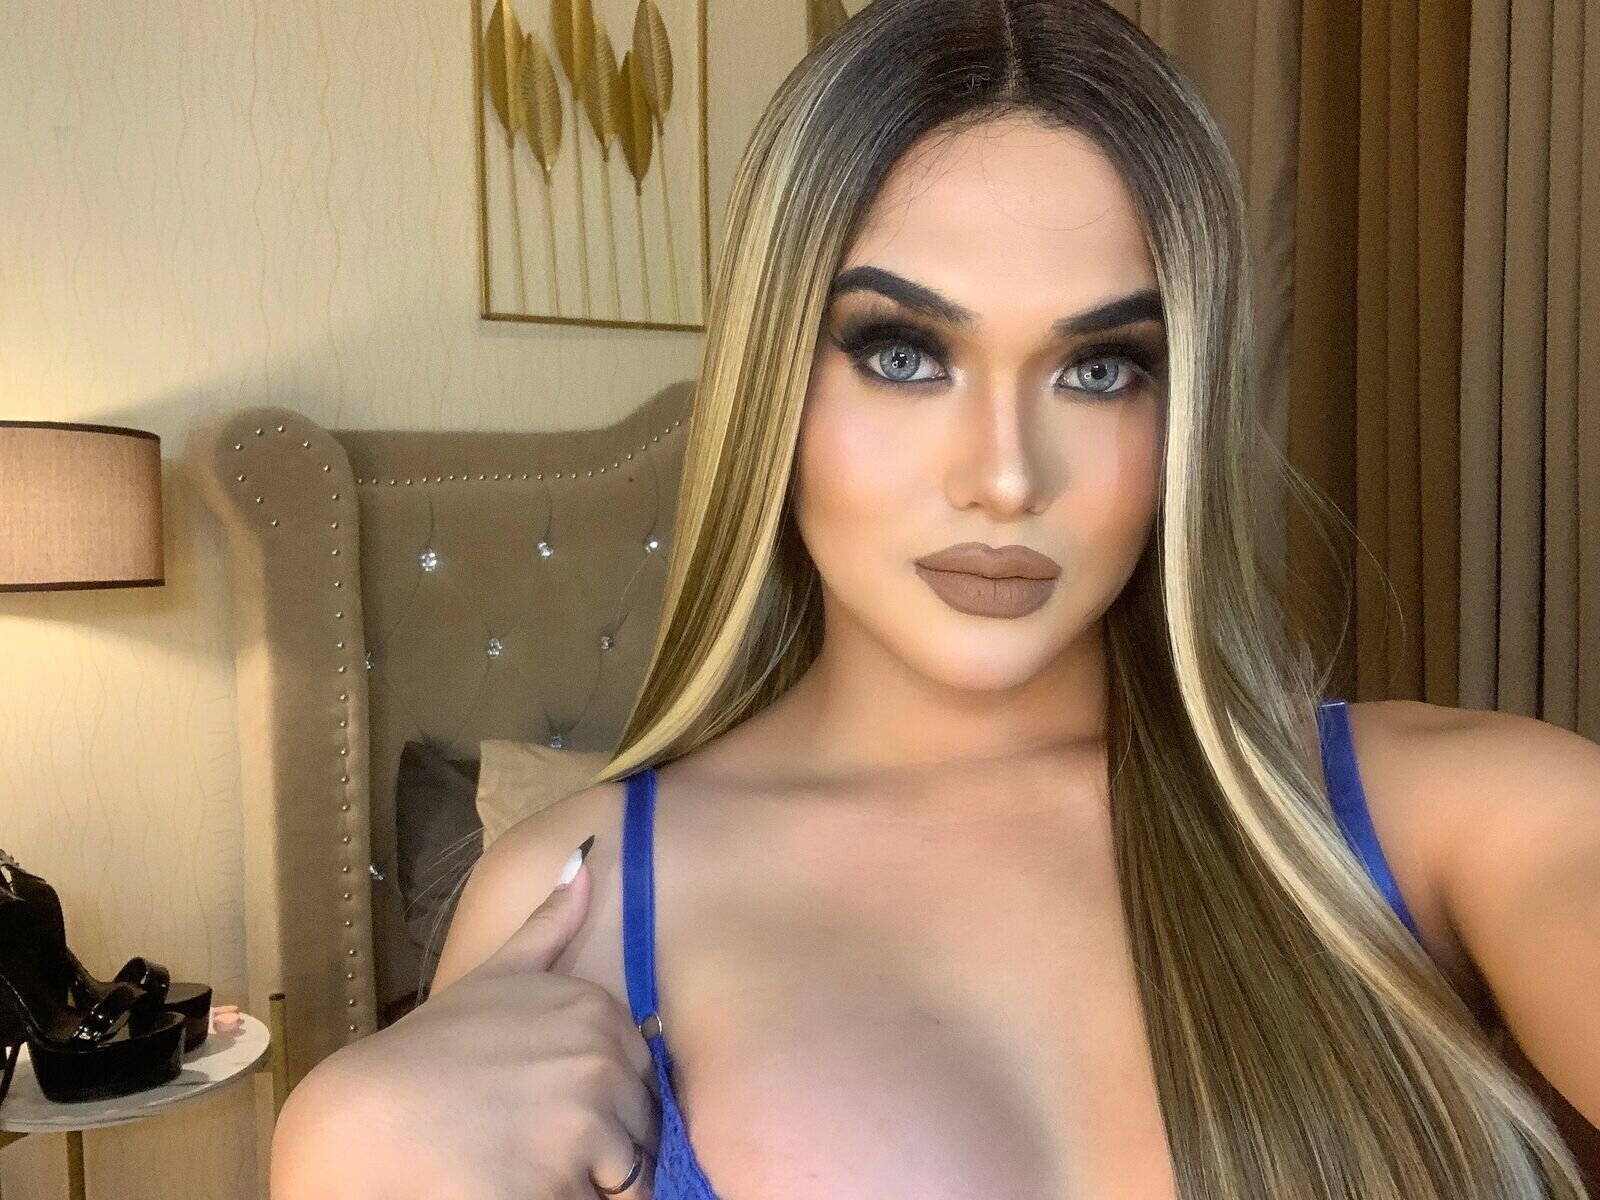 Free Live Sex Chat With VictoriaHillova